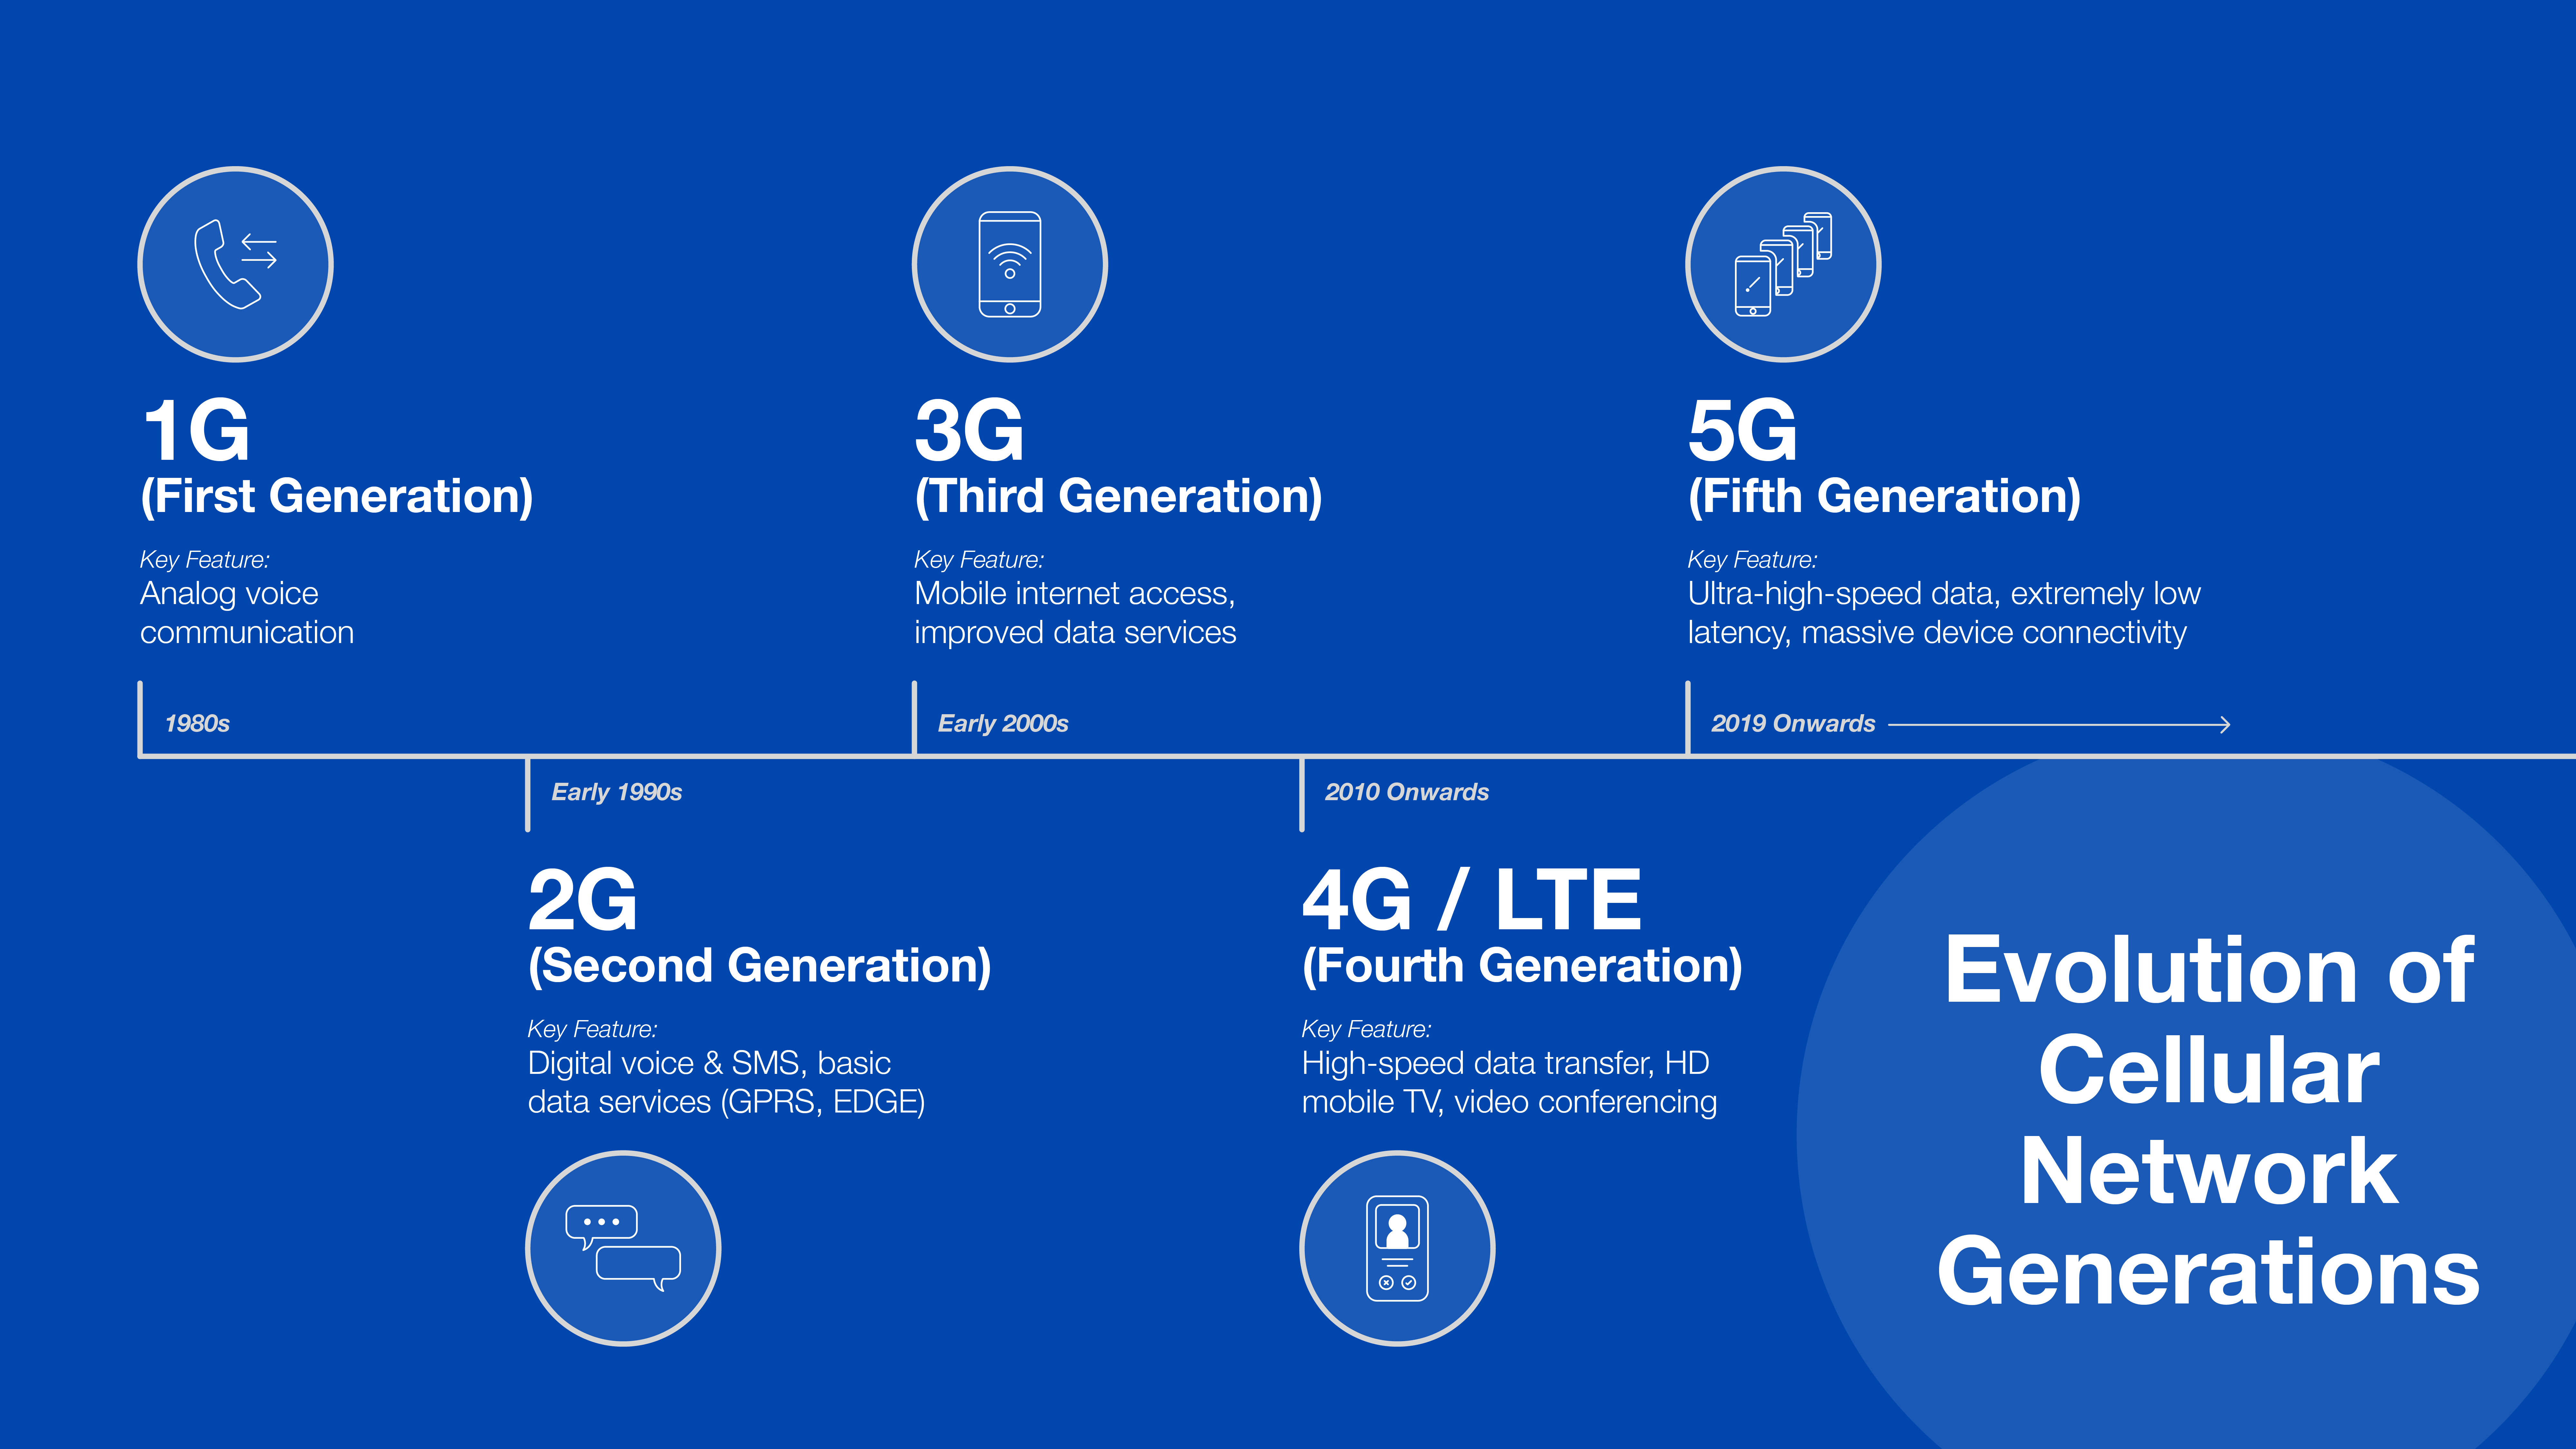 evolution of networks from 1G to 5G